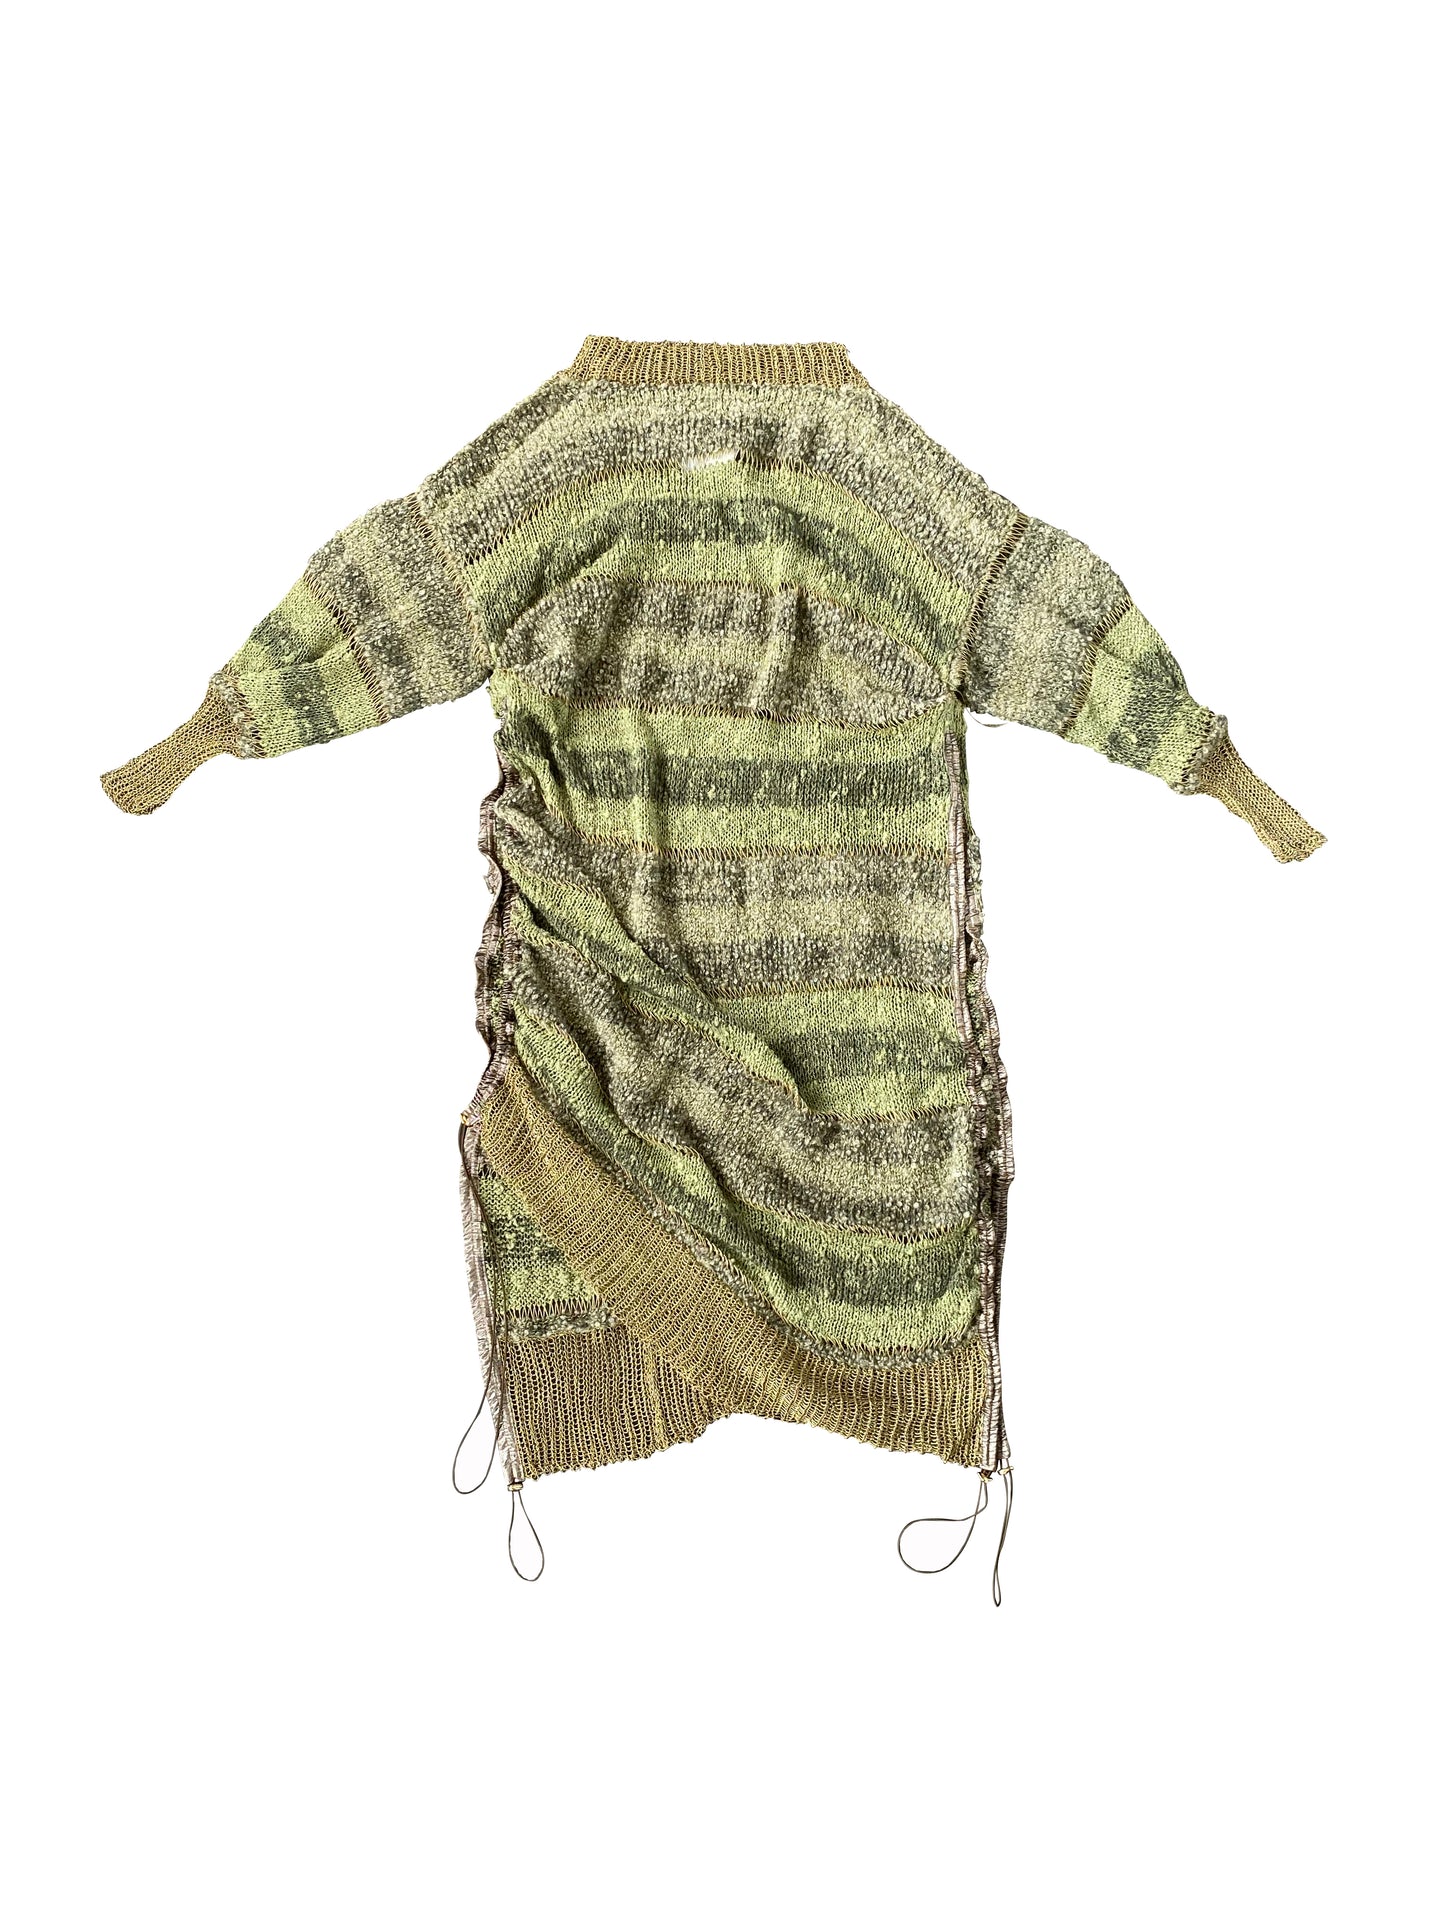 Green-Moss Knitted Draped Dress with Adjustable Drawstrings in Mohair, Wool, Viscose Blend